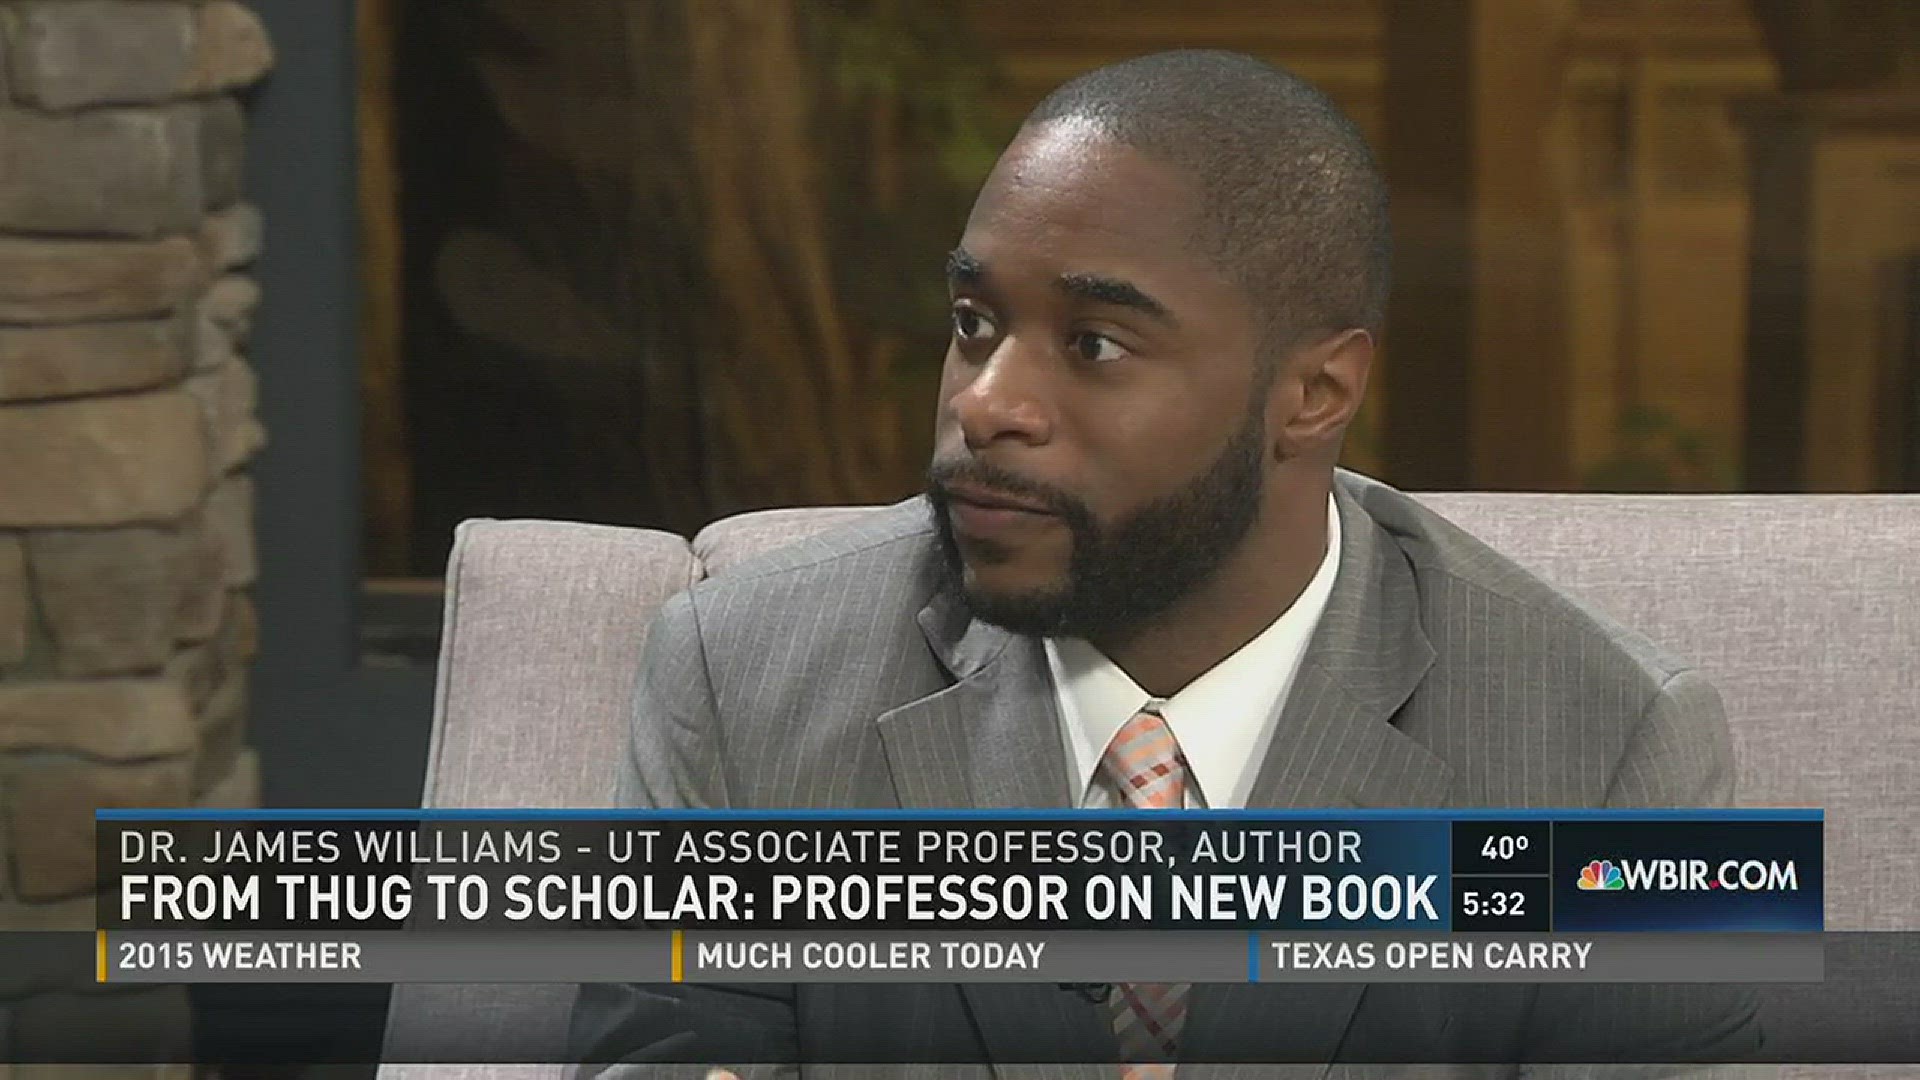 Dr. James Williams, a University of Tennessee professor, has written a book about his troubled youth and journey to rise above it. Williams discusses his experiences and efforts to combat gang violence.